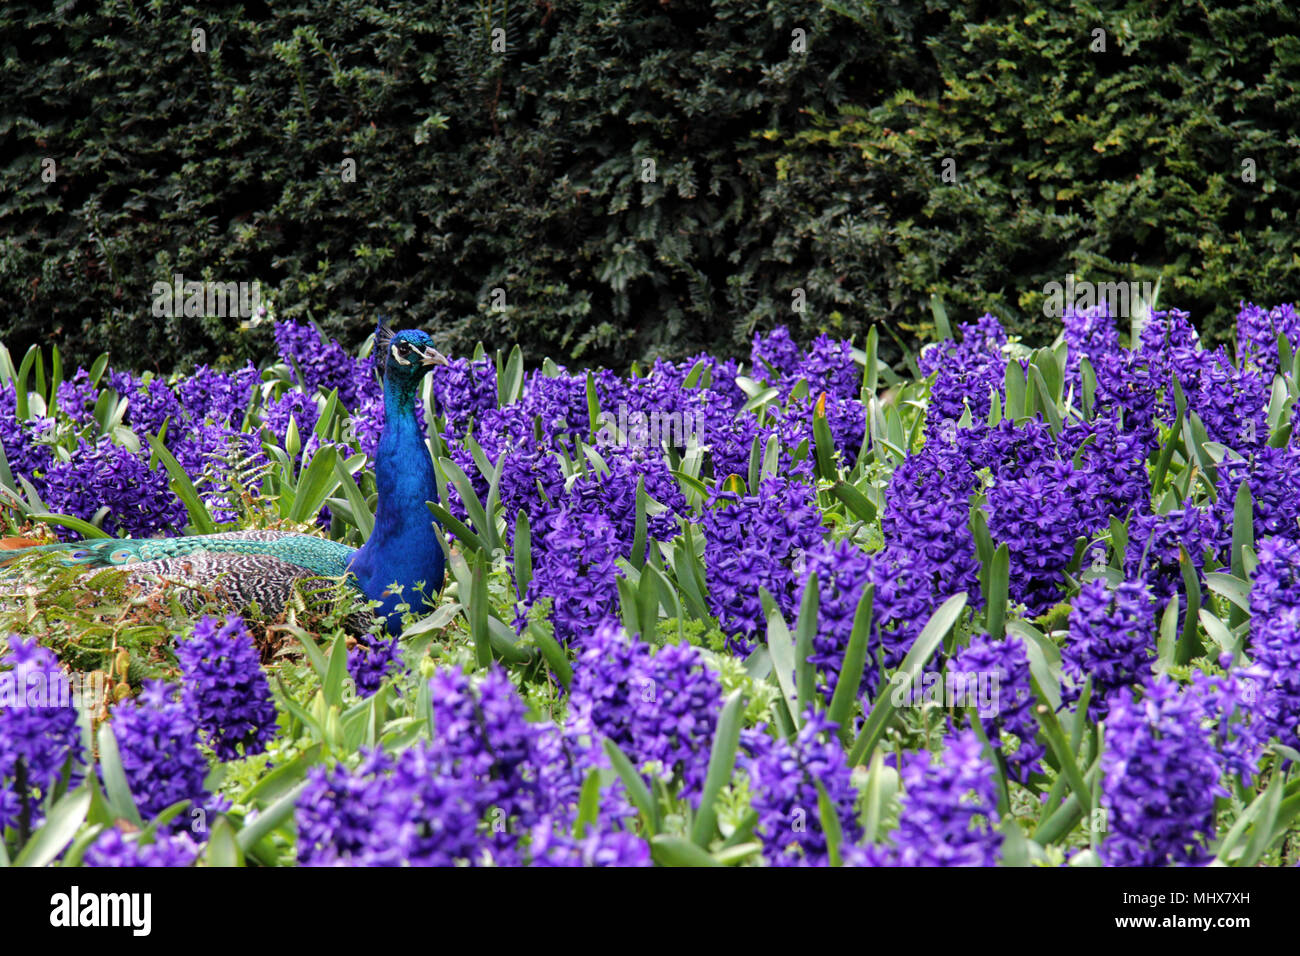 Brilliant Blue Peacock resting in a purple flower bed, Male Indian Peacock Stock Photo